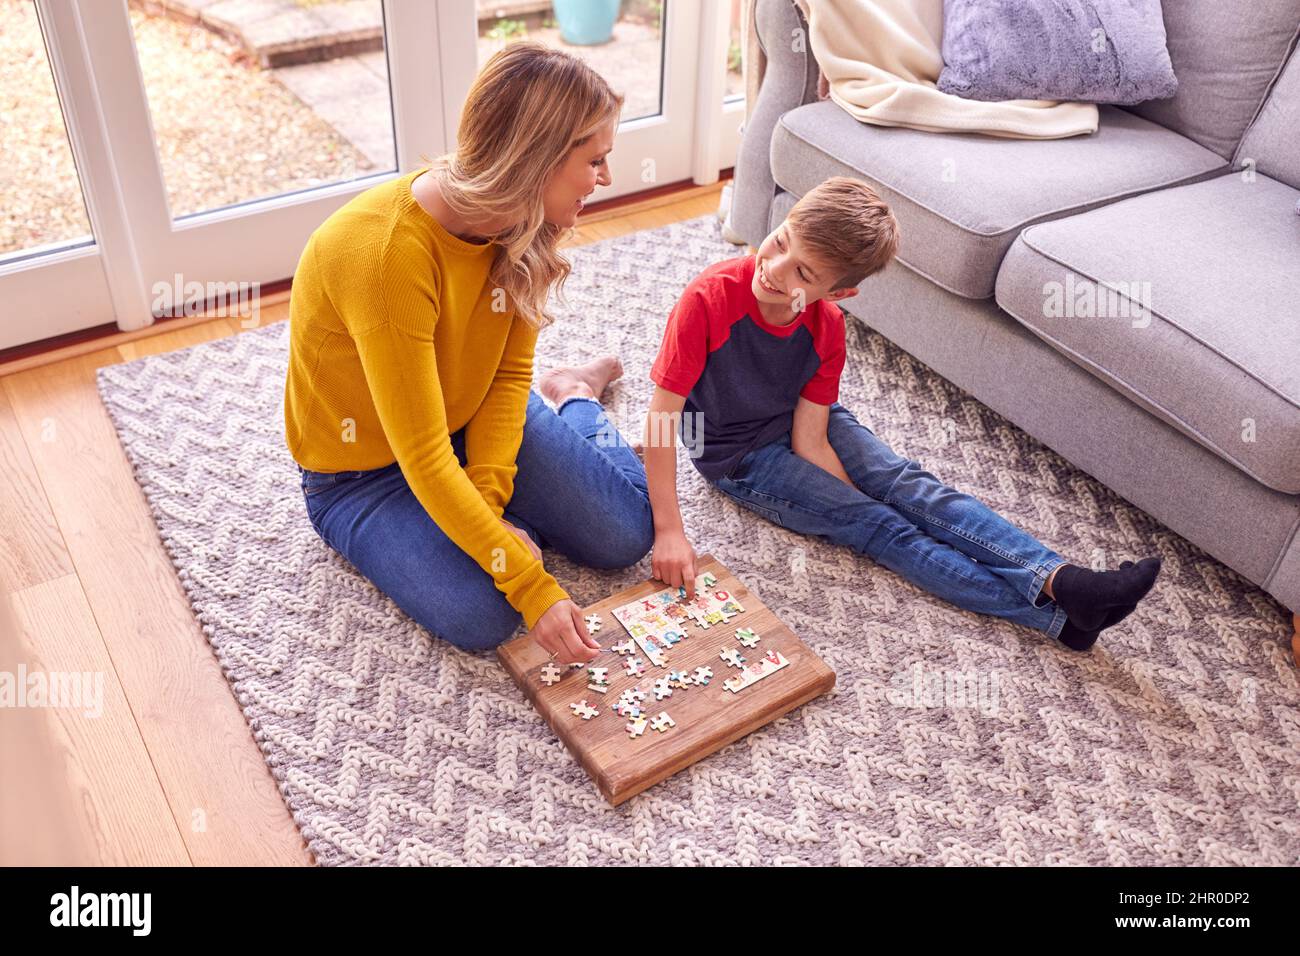 Mother And Son At Home Doing Jigsaw Puzzle On Floor Of Lounge Together Stock Photo